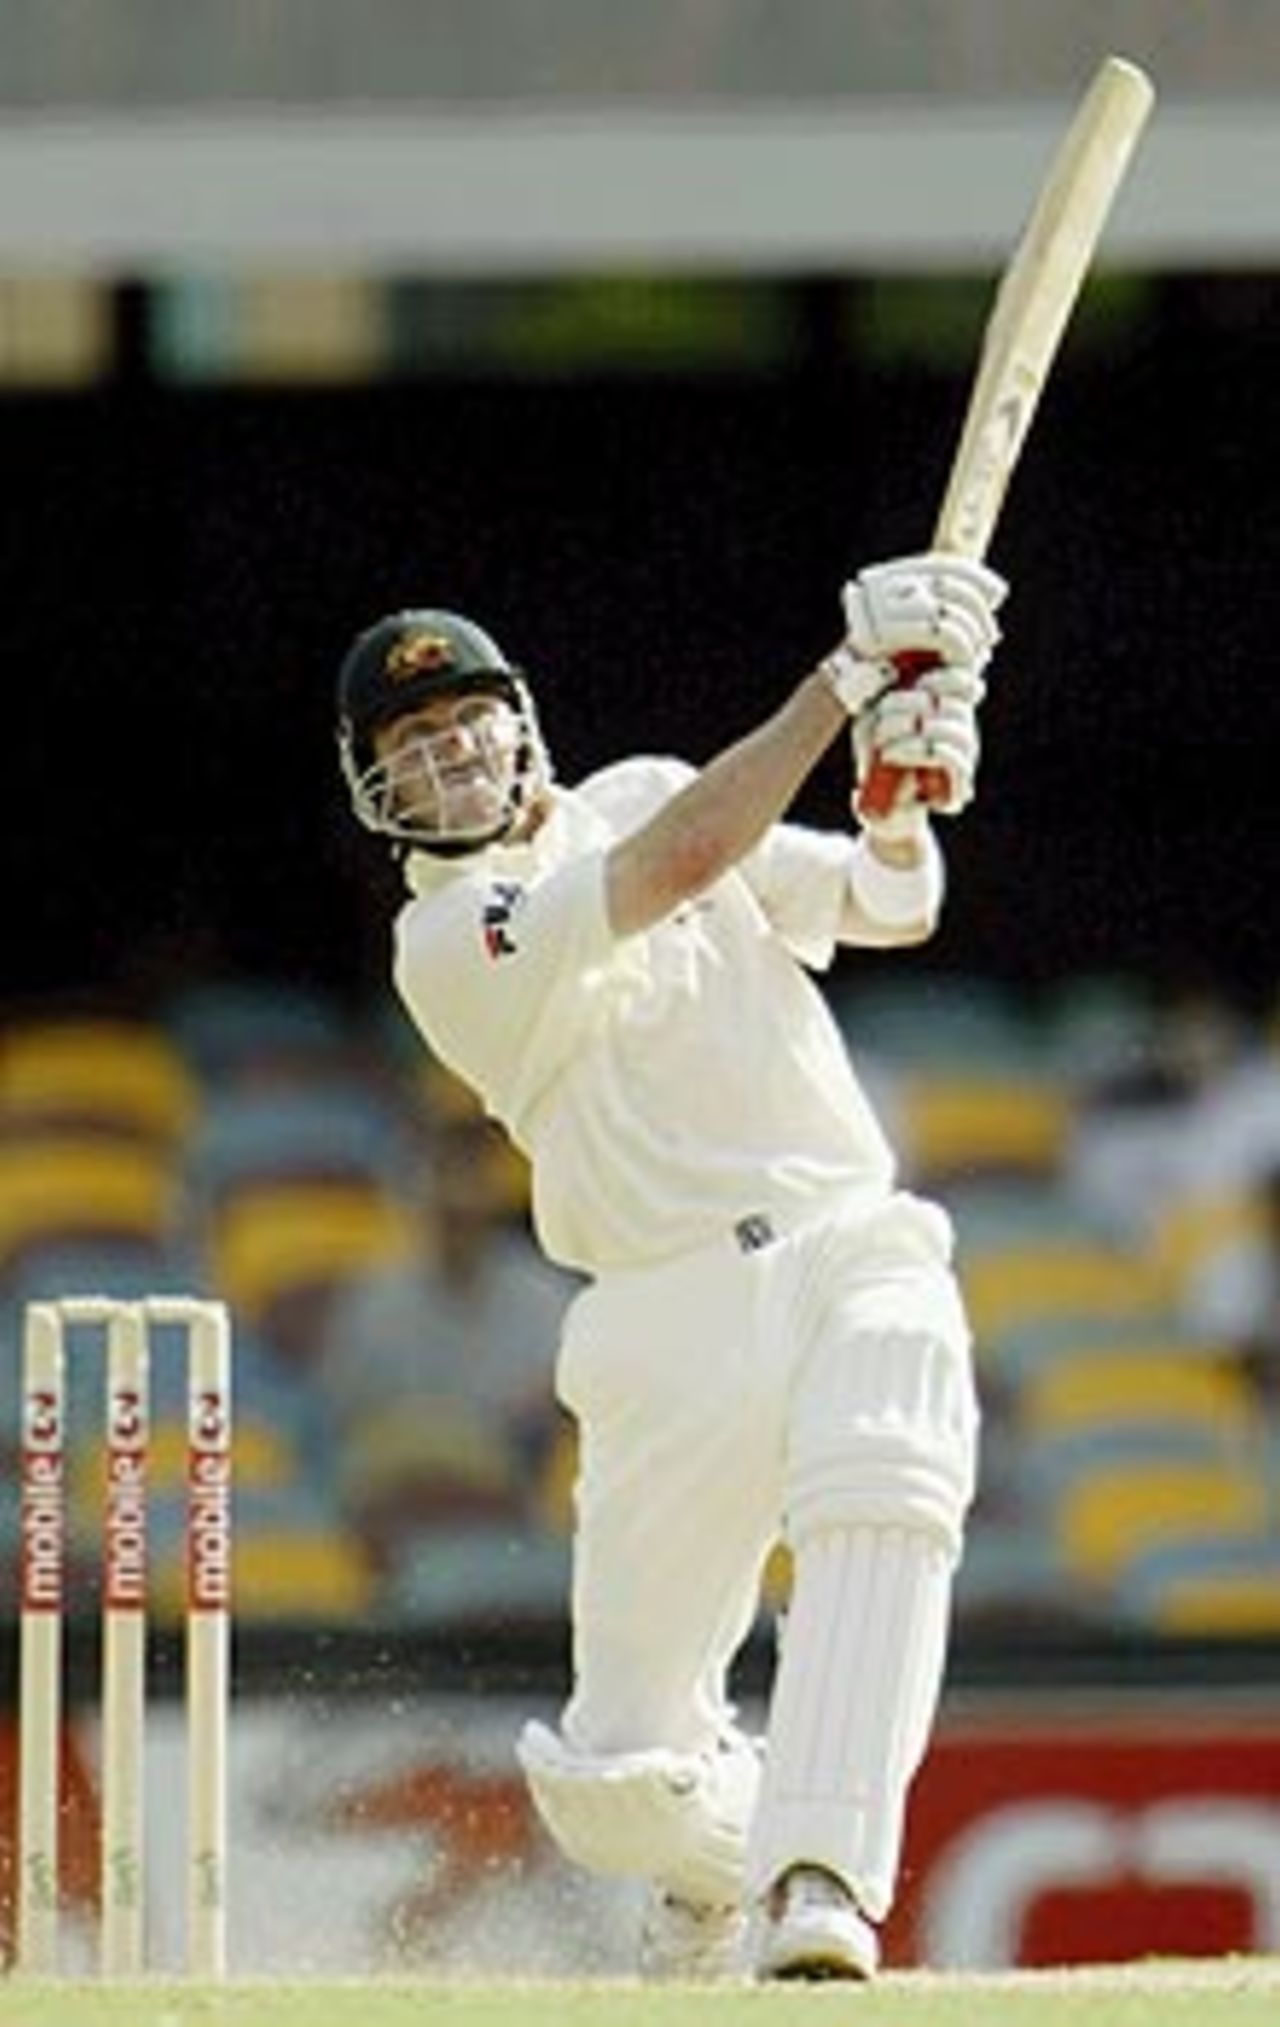 Damien Martyn hits one into the crowd, Australia v India, 1st Test, Brisbane, 5th day, December 8, 2003